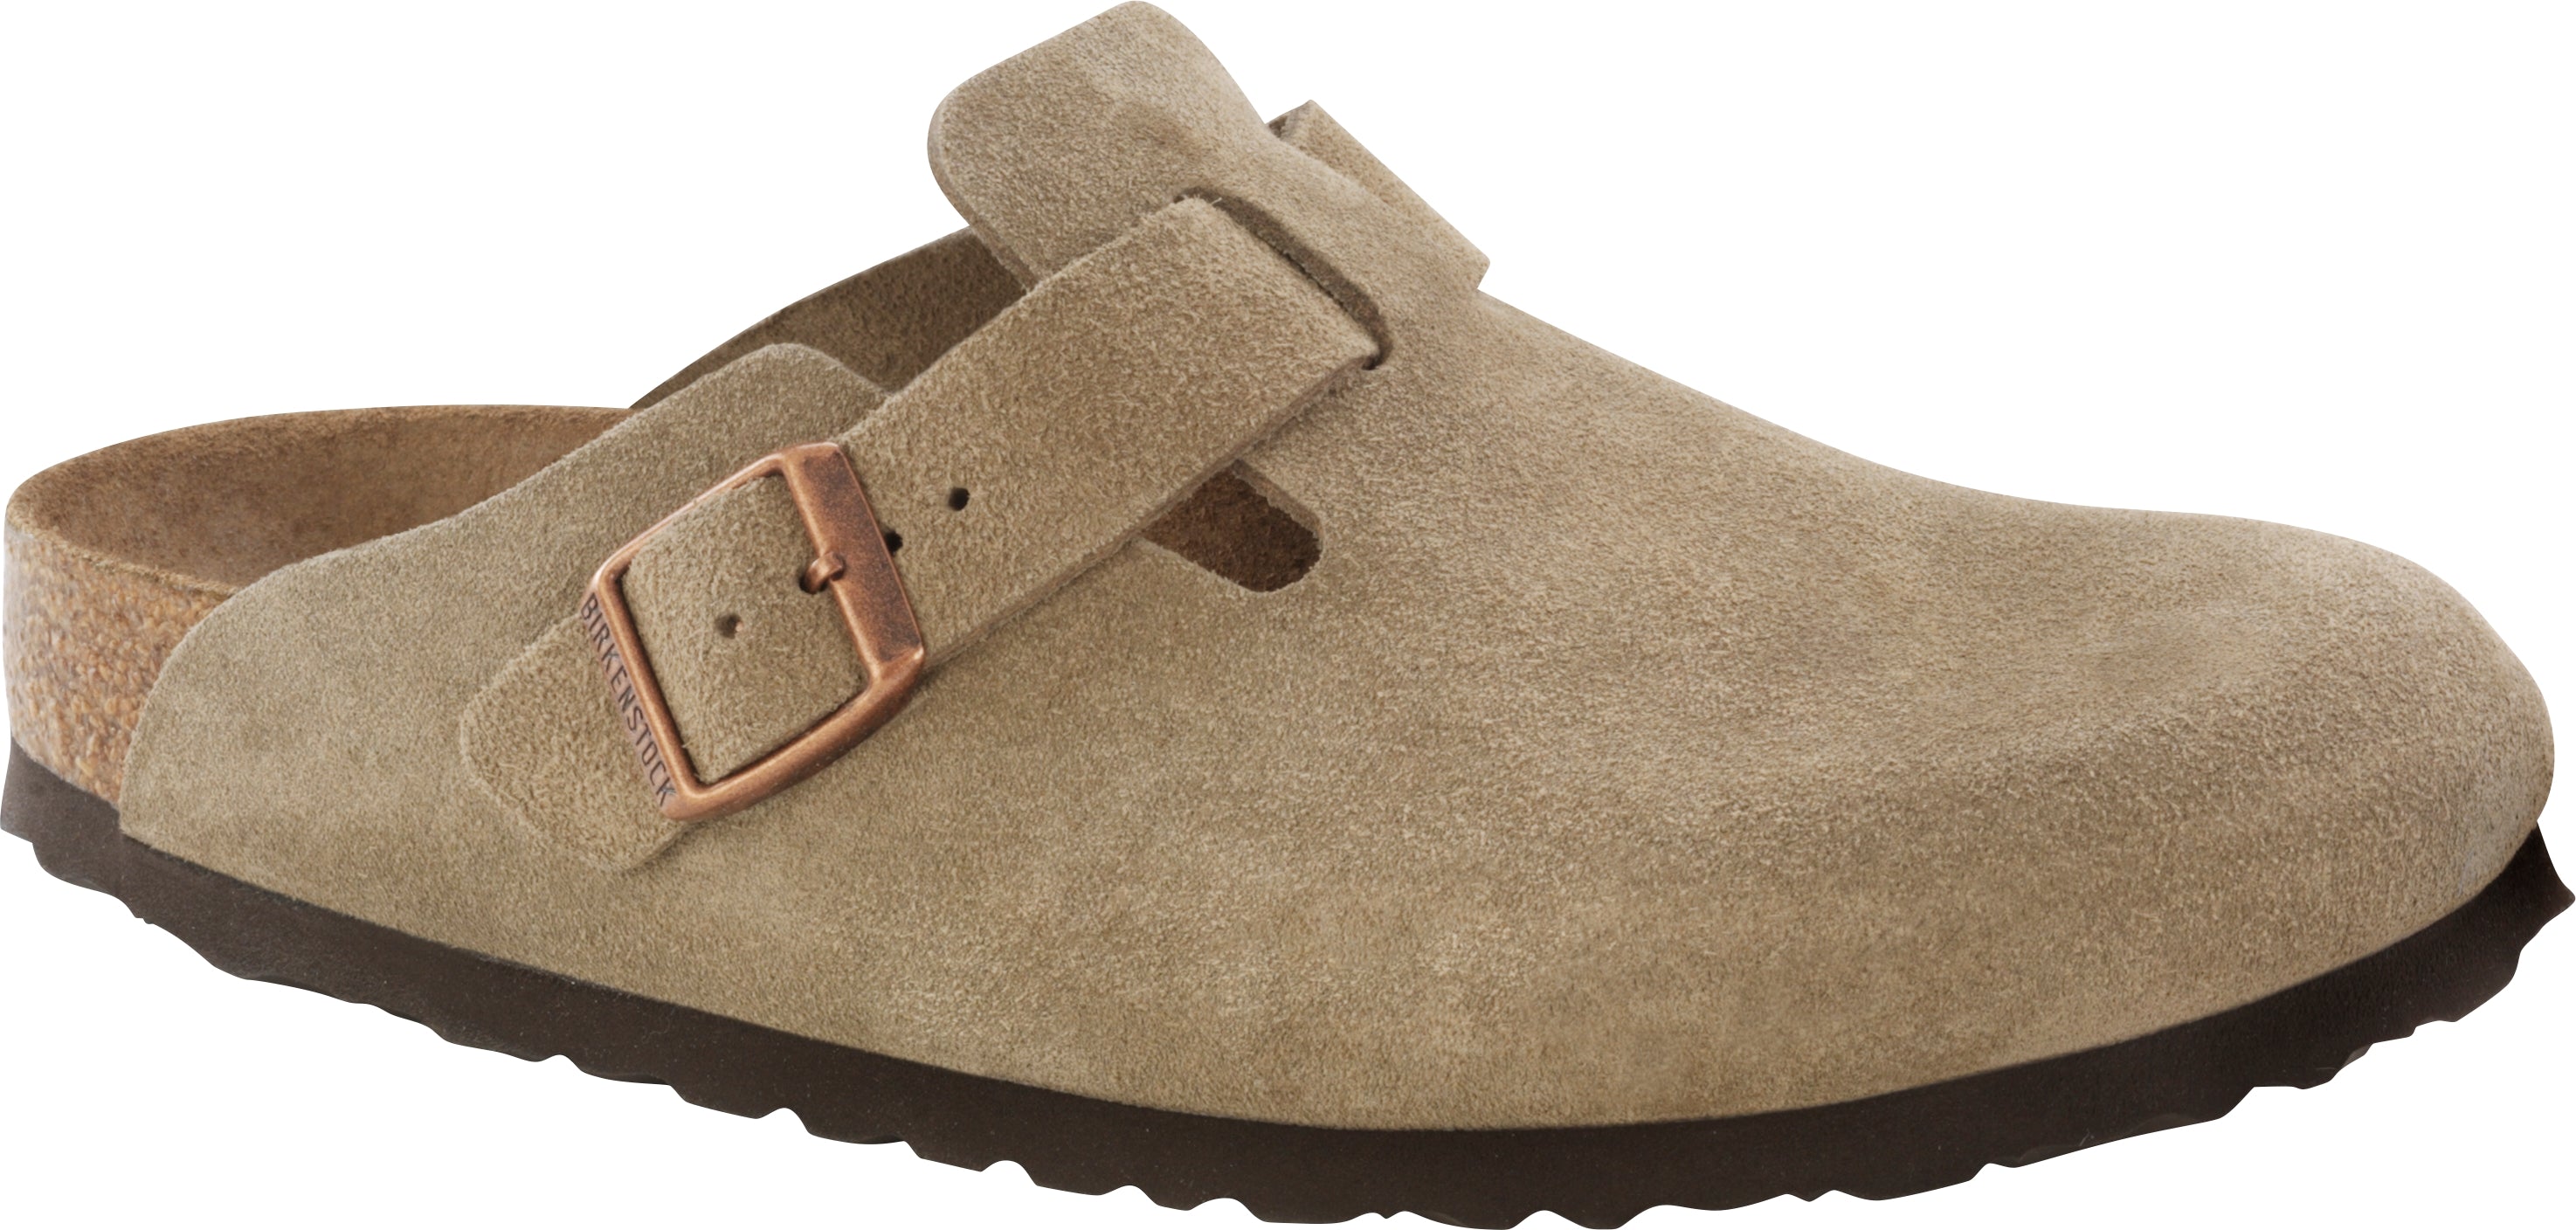 Birkenstock Boston Taupe Leather Brown Suede Clogs Mules Slippers 44 Regular